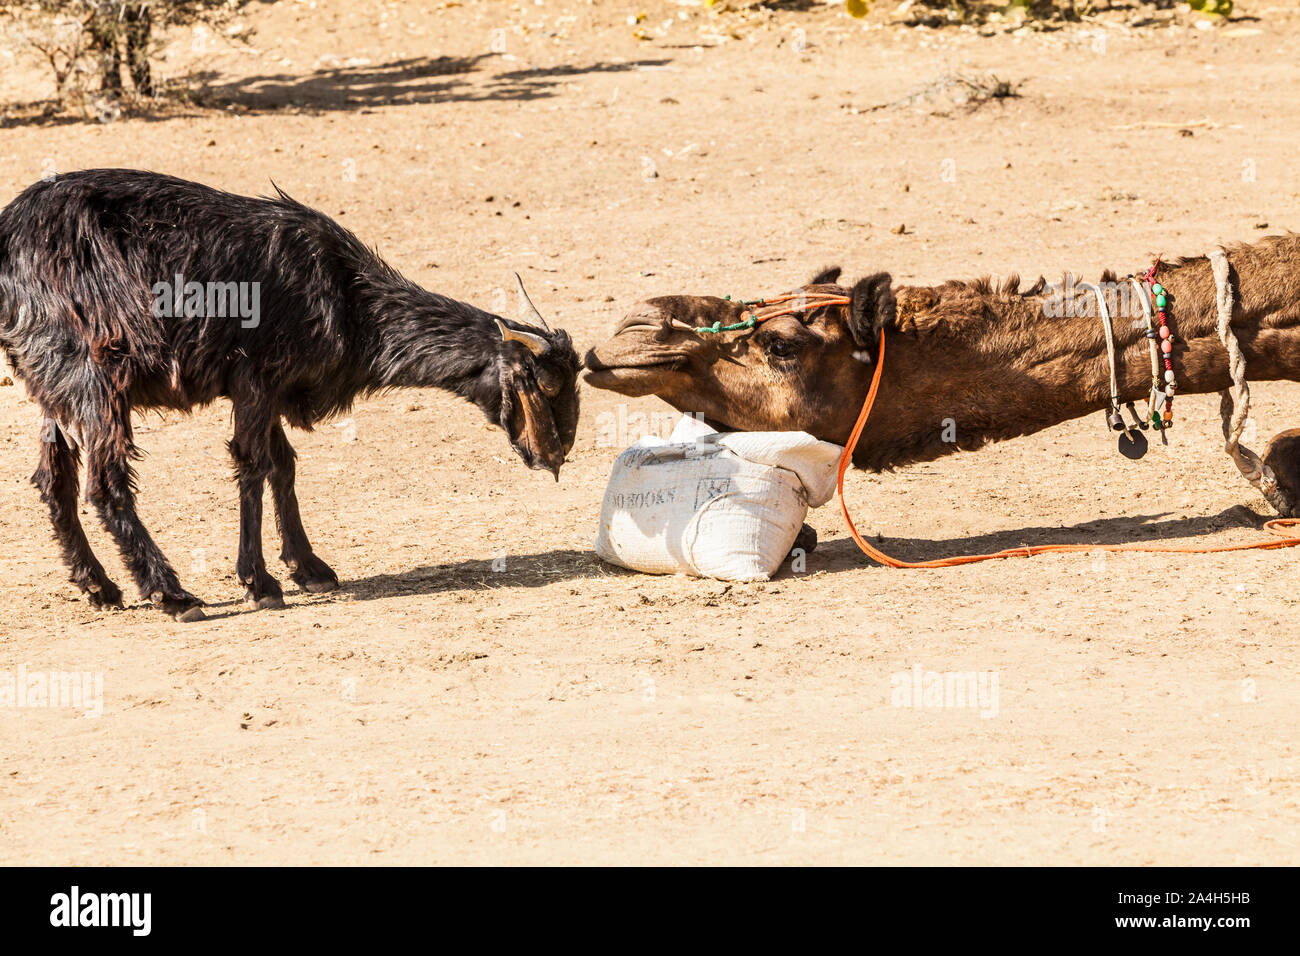 A camel defends his food sack from an encroching goat near Kanoi village in Western Rajasthan, India, The Thar Desert. Stock Photo